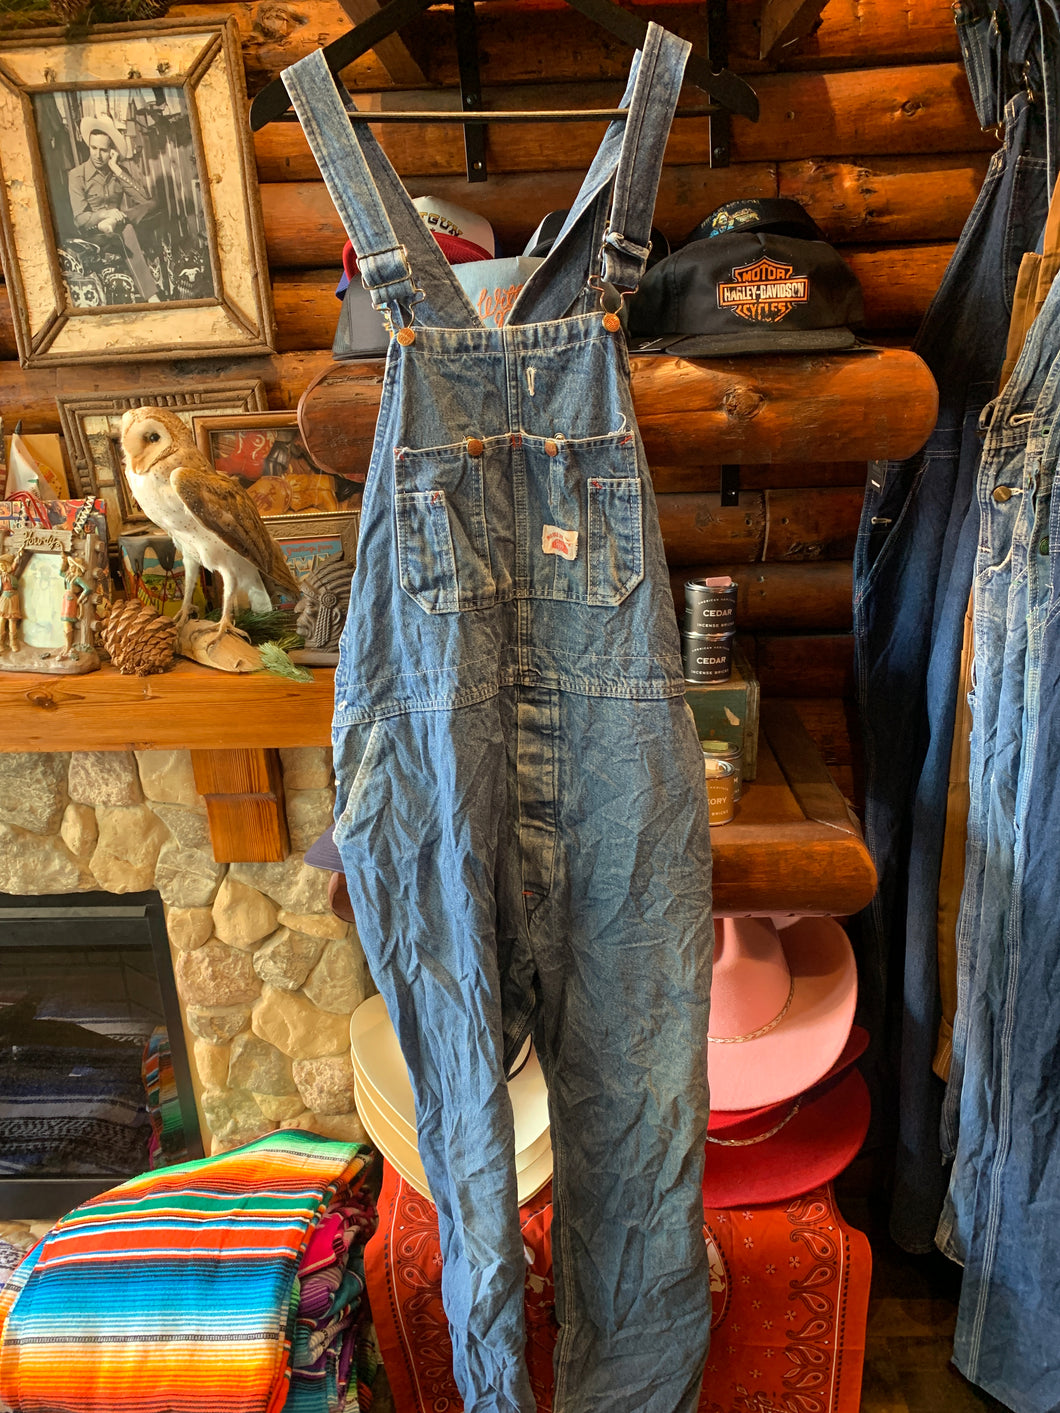 Vintage Roundhouse Overalls, W38-39